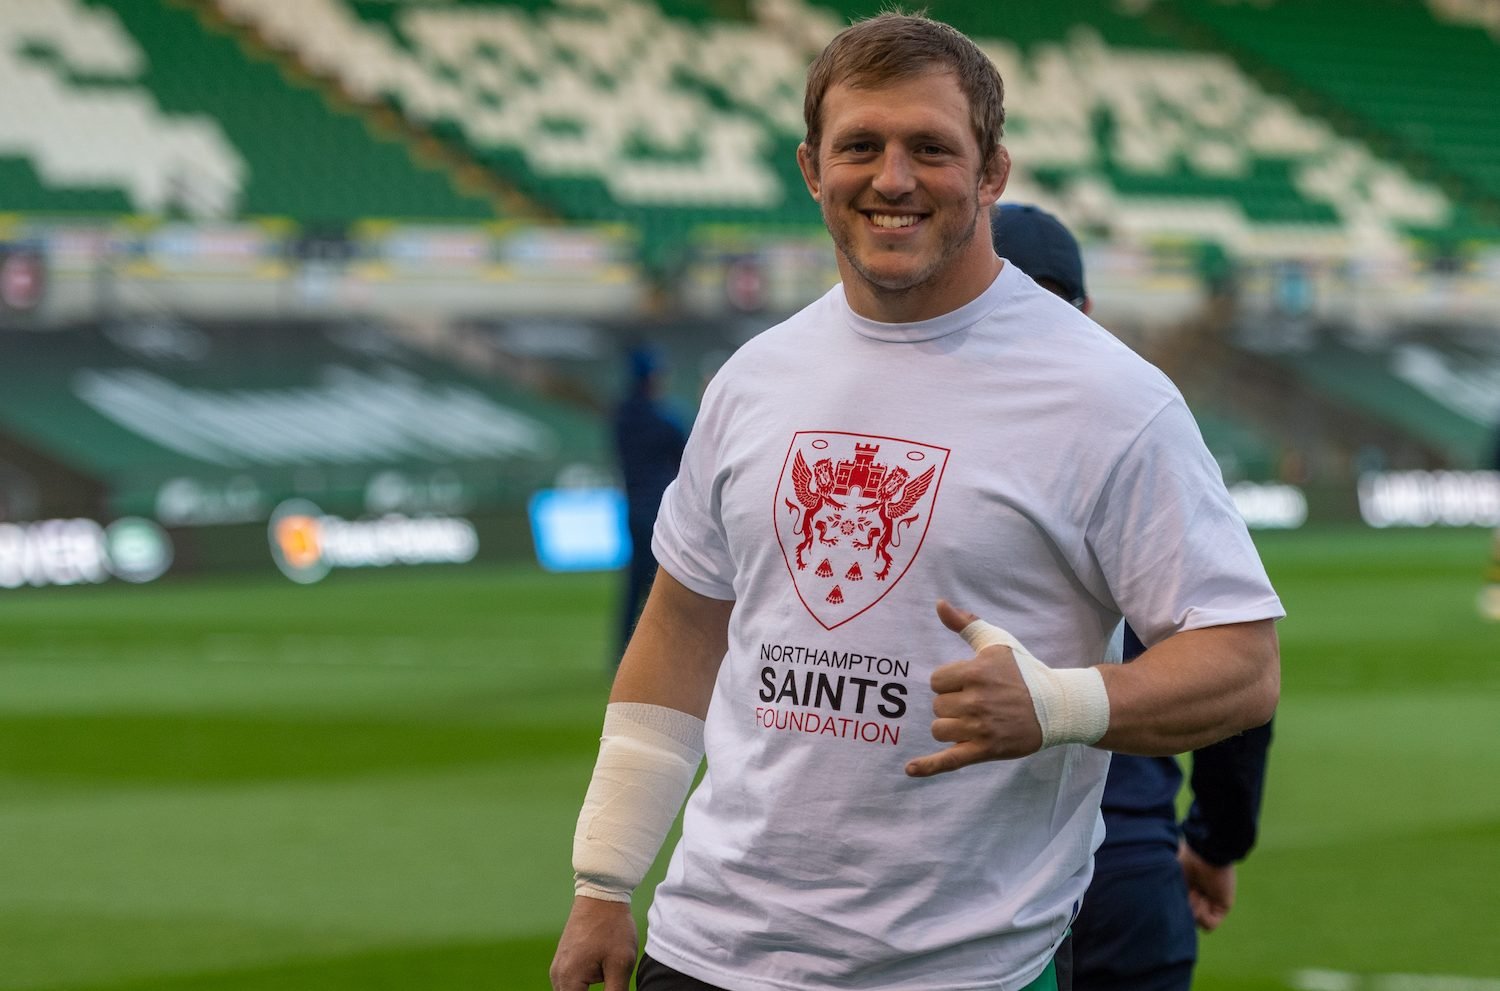 Alex Waller on Northampton Saints Foundation‘s annual Takeover Day